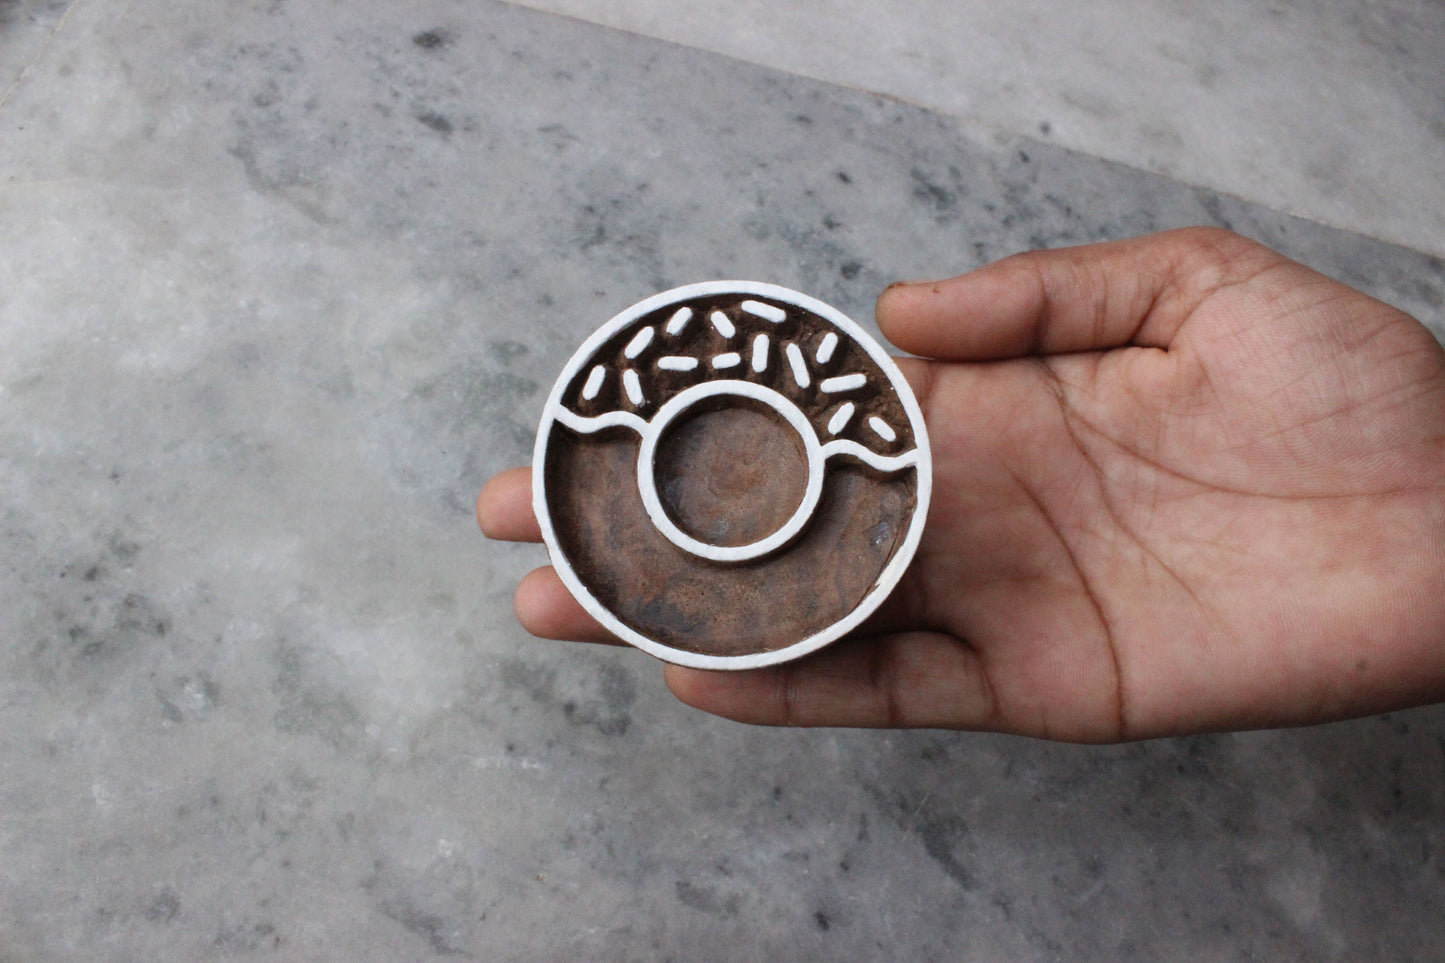 Donut Wood Block Stamp Indian Stamp Circle Block Print Stamp Indian Textile Block For Printing Hand Carved Soap Stamp Traditional Textile Block